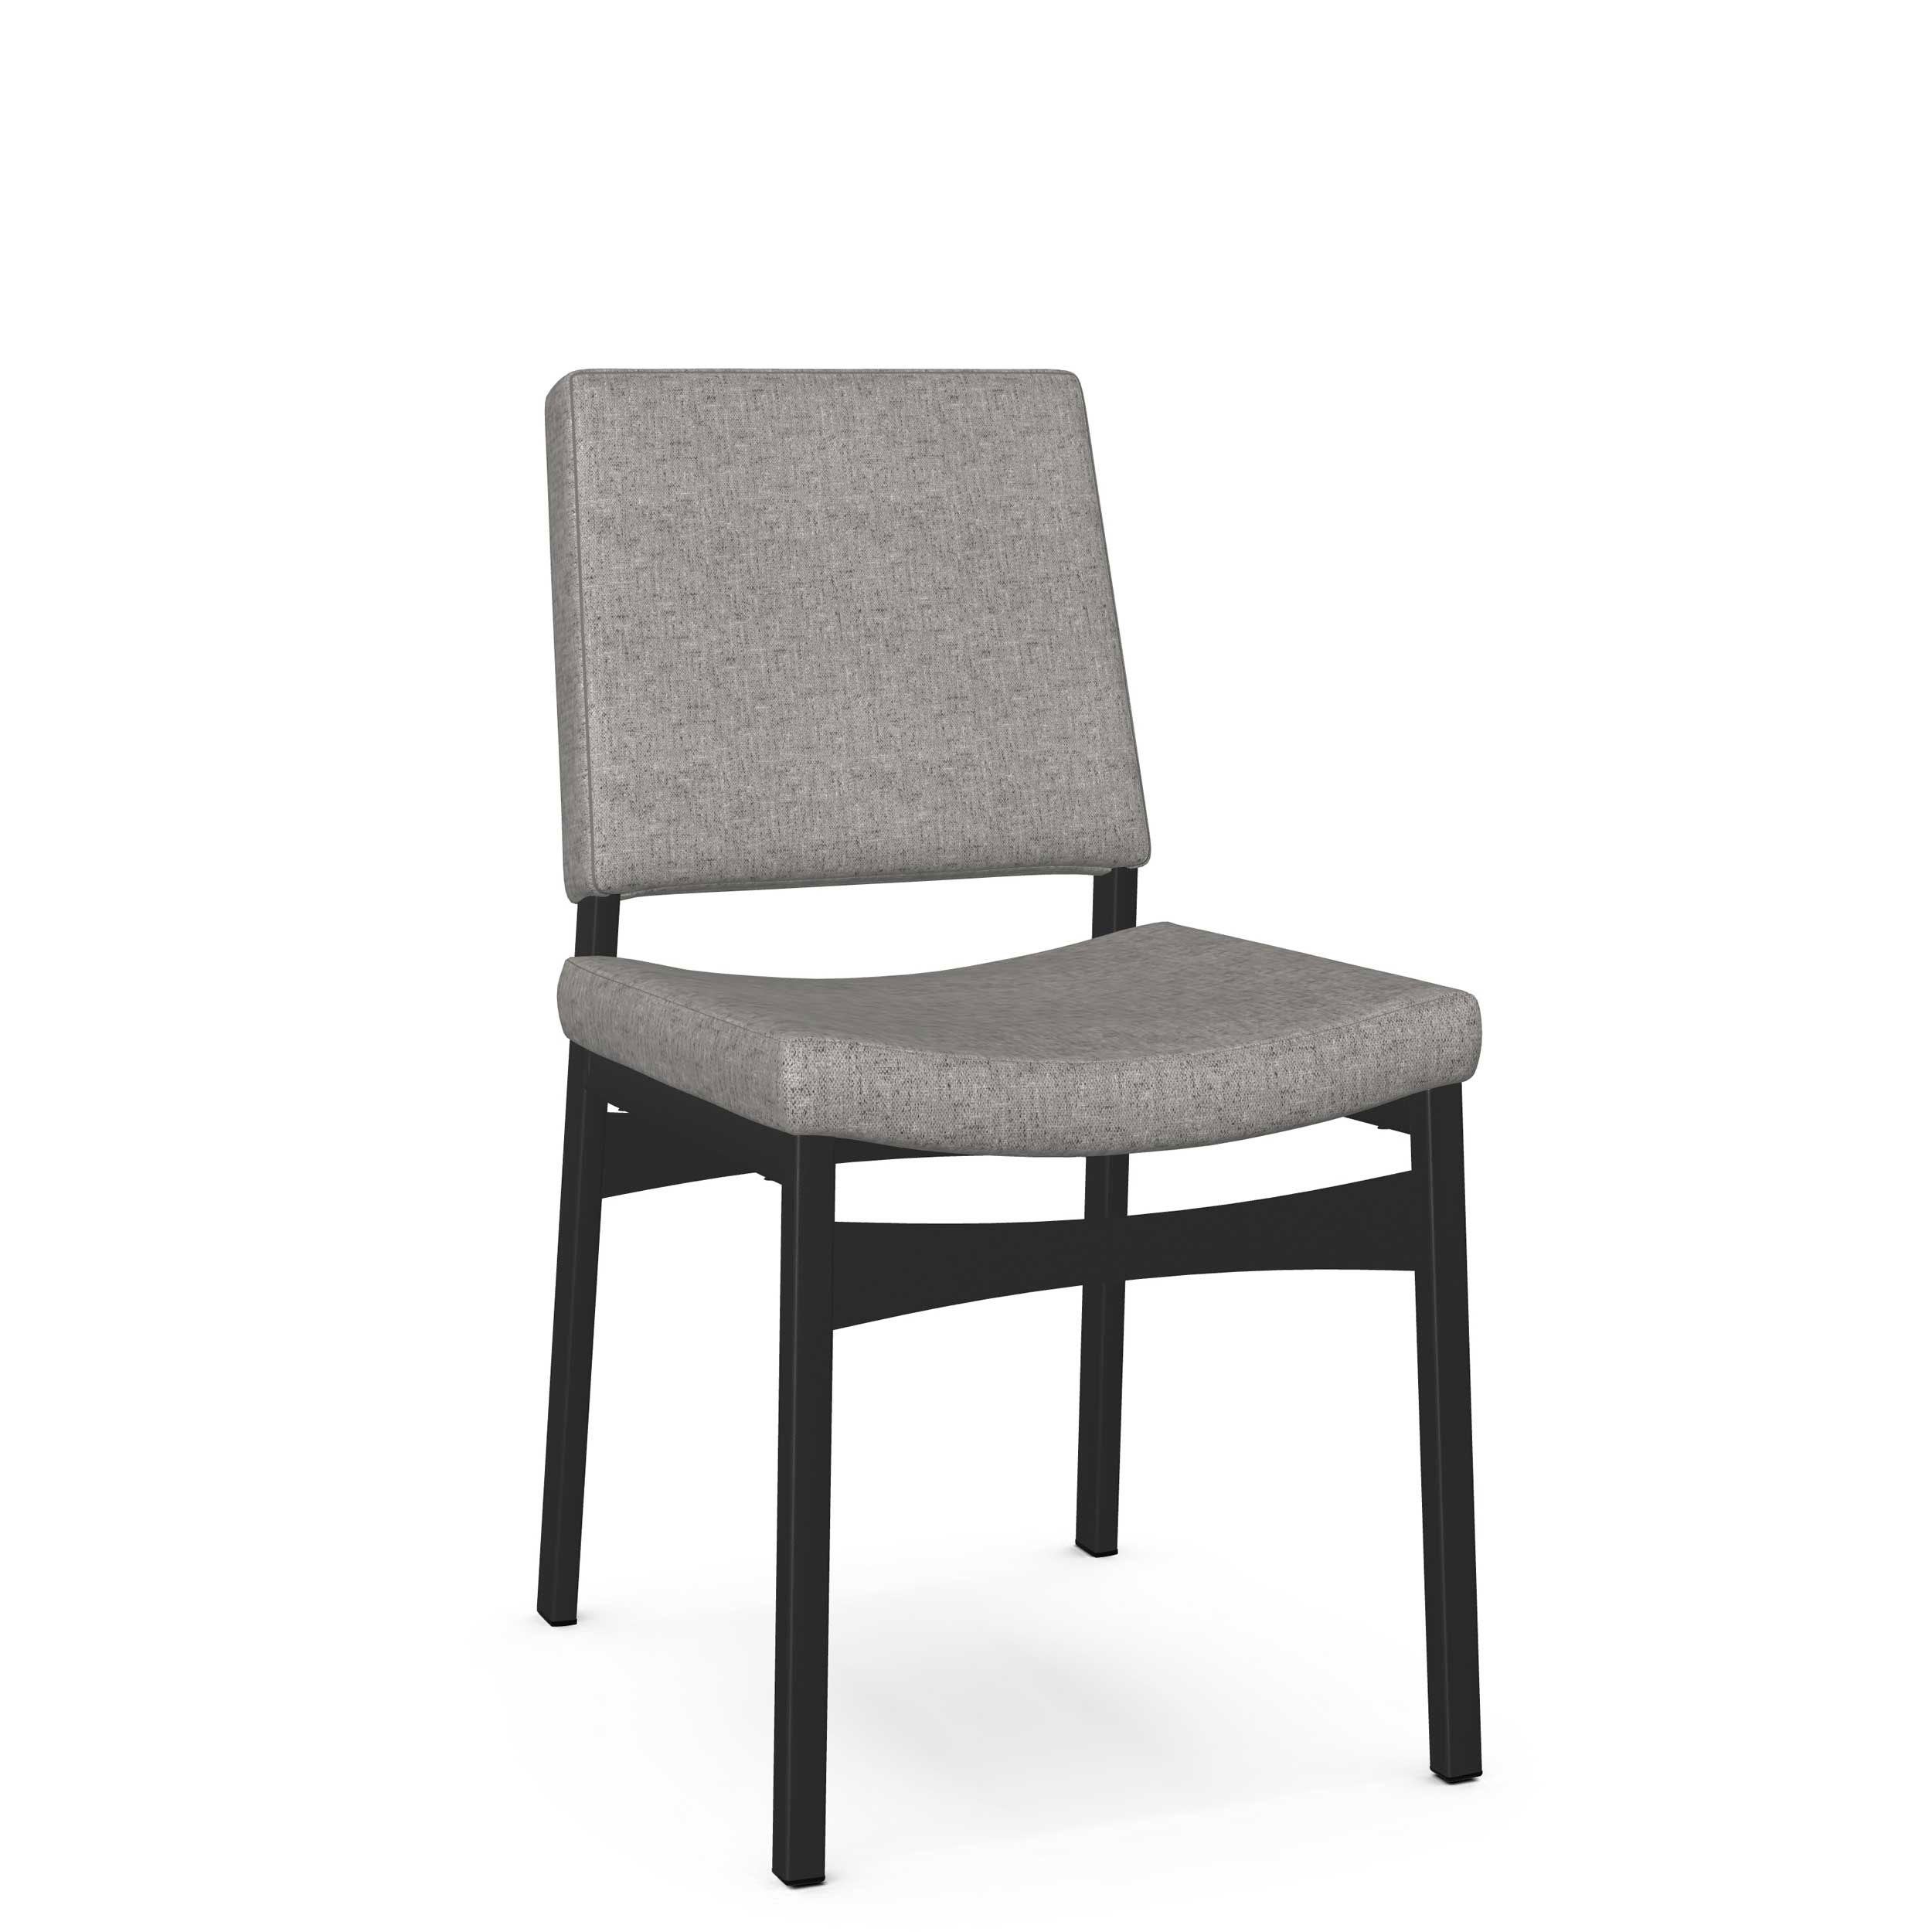 Amisco_Kendra_Dining_Chair